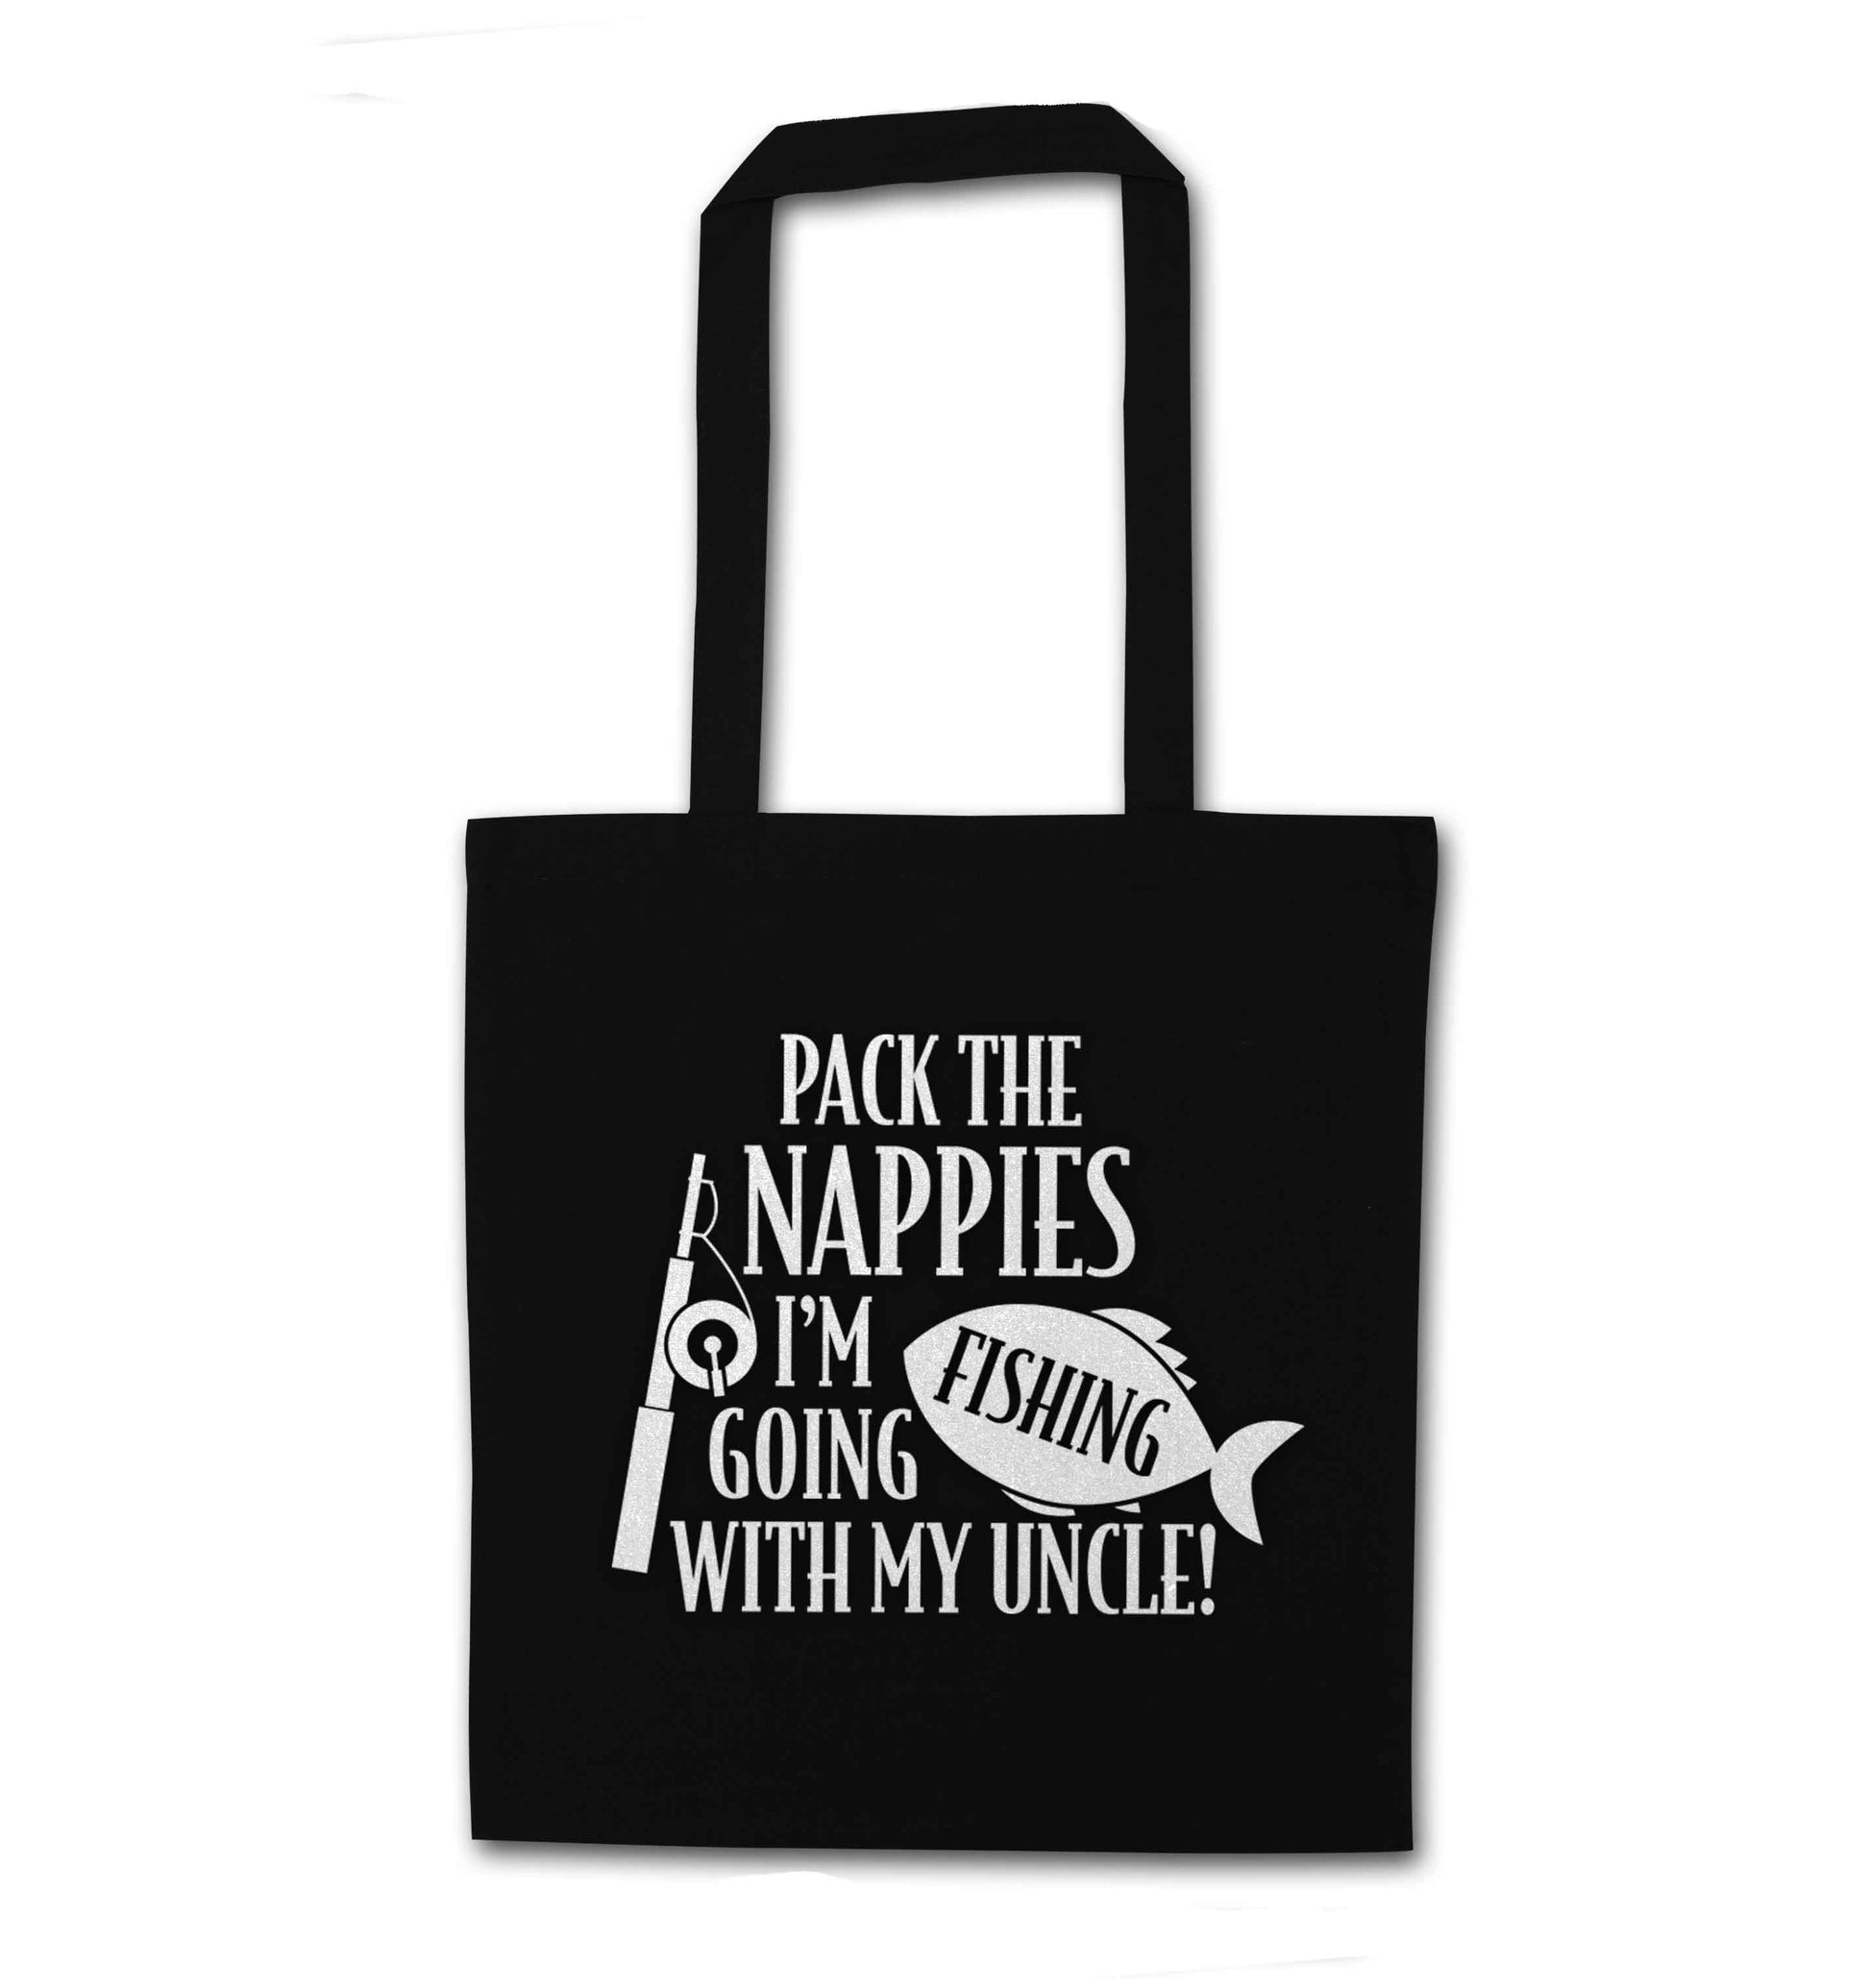 Pack the nappies I'm going fishing with my Uncle black tote bag